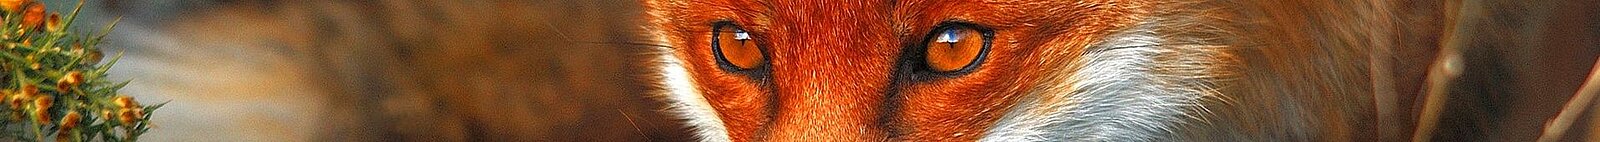 face of a red fox